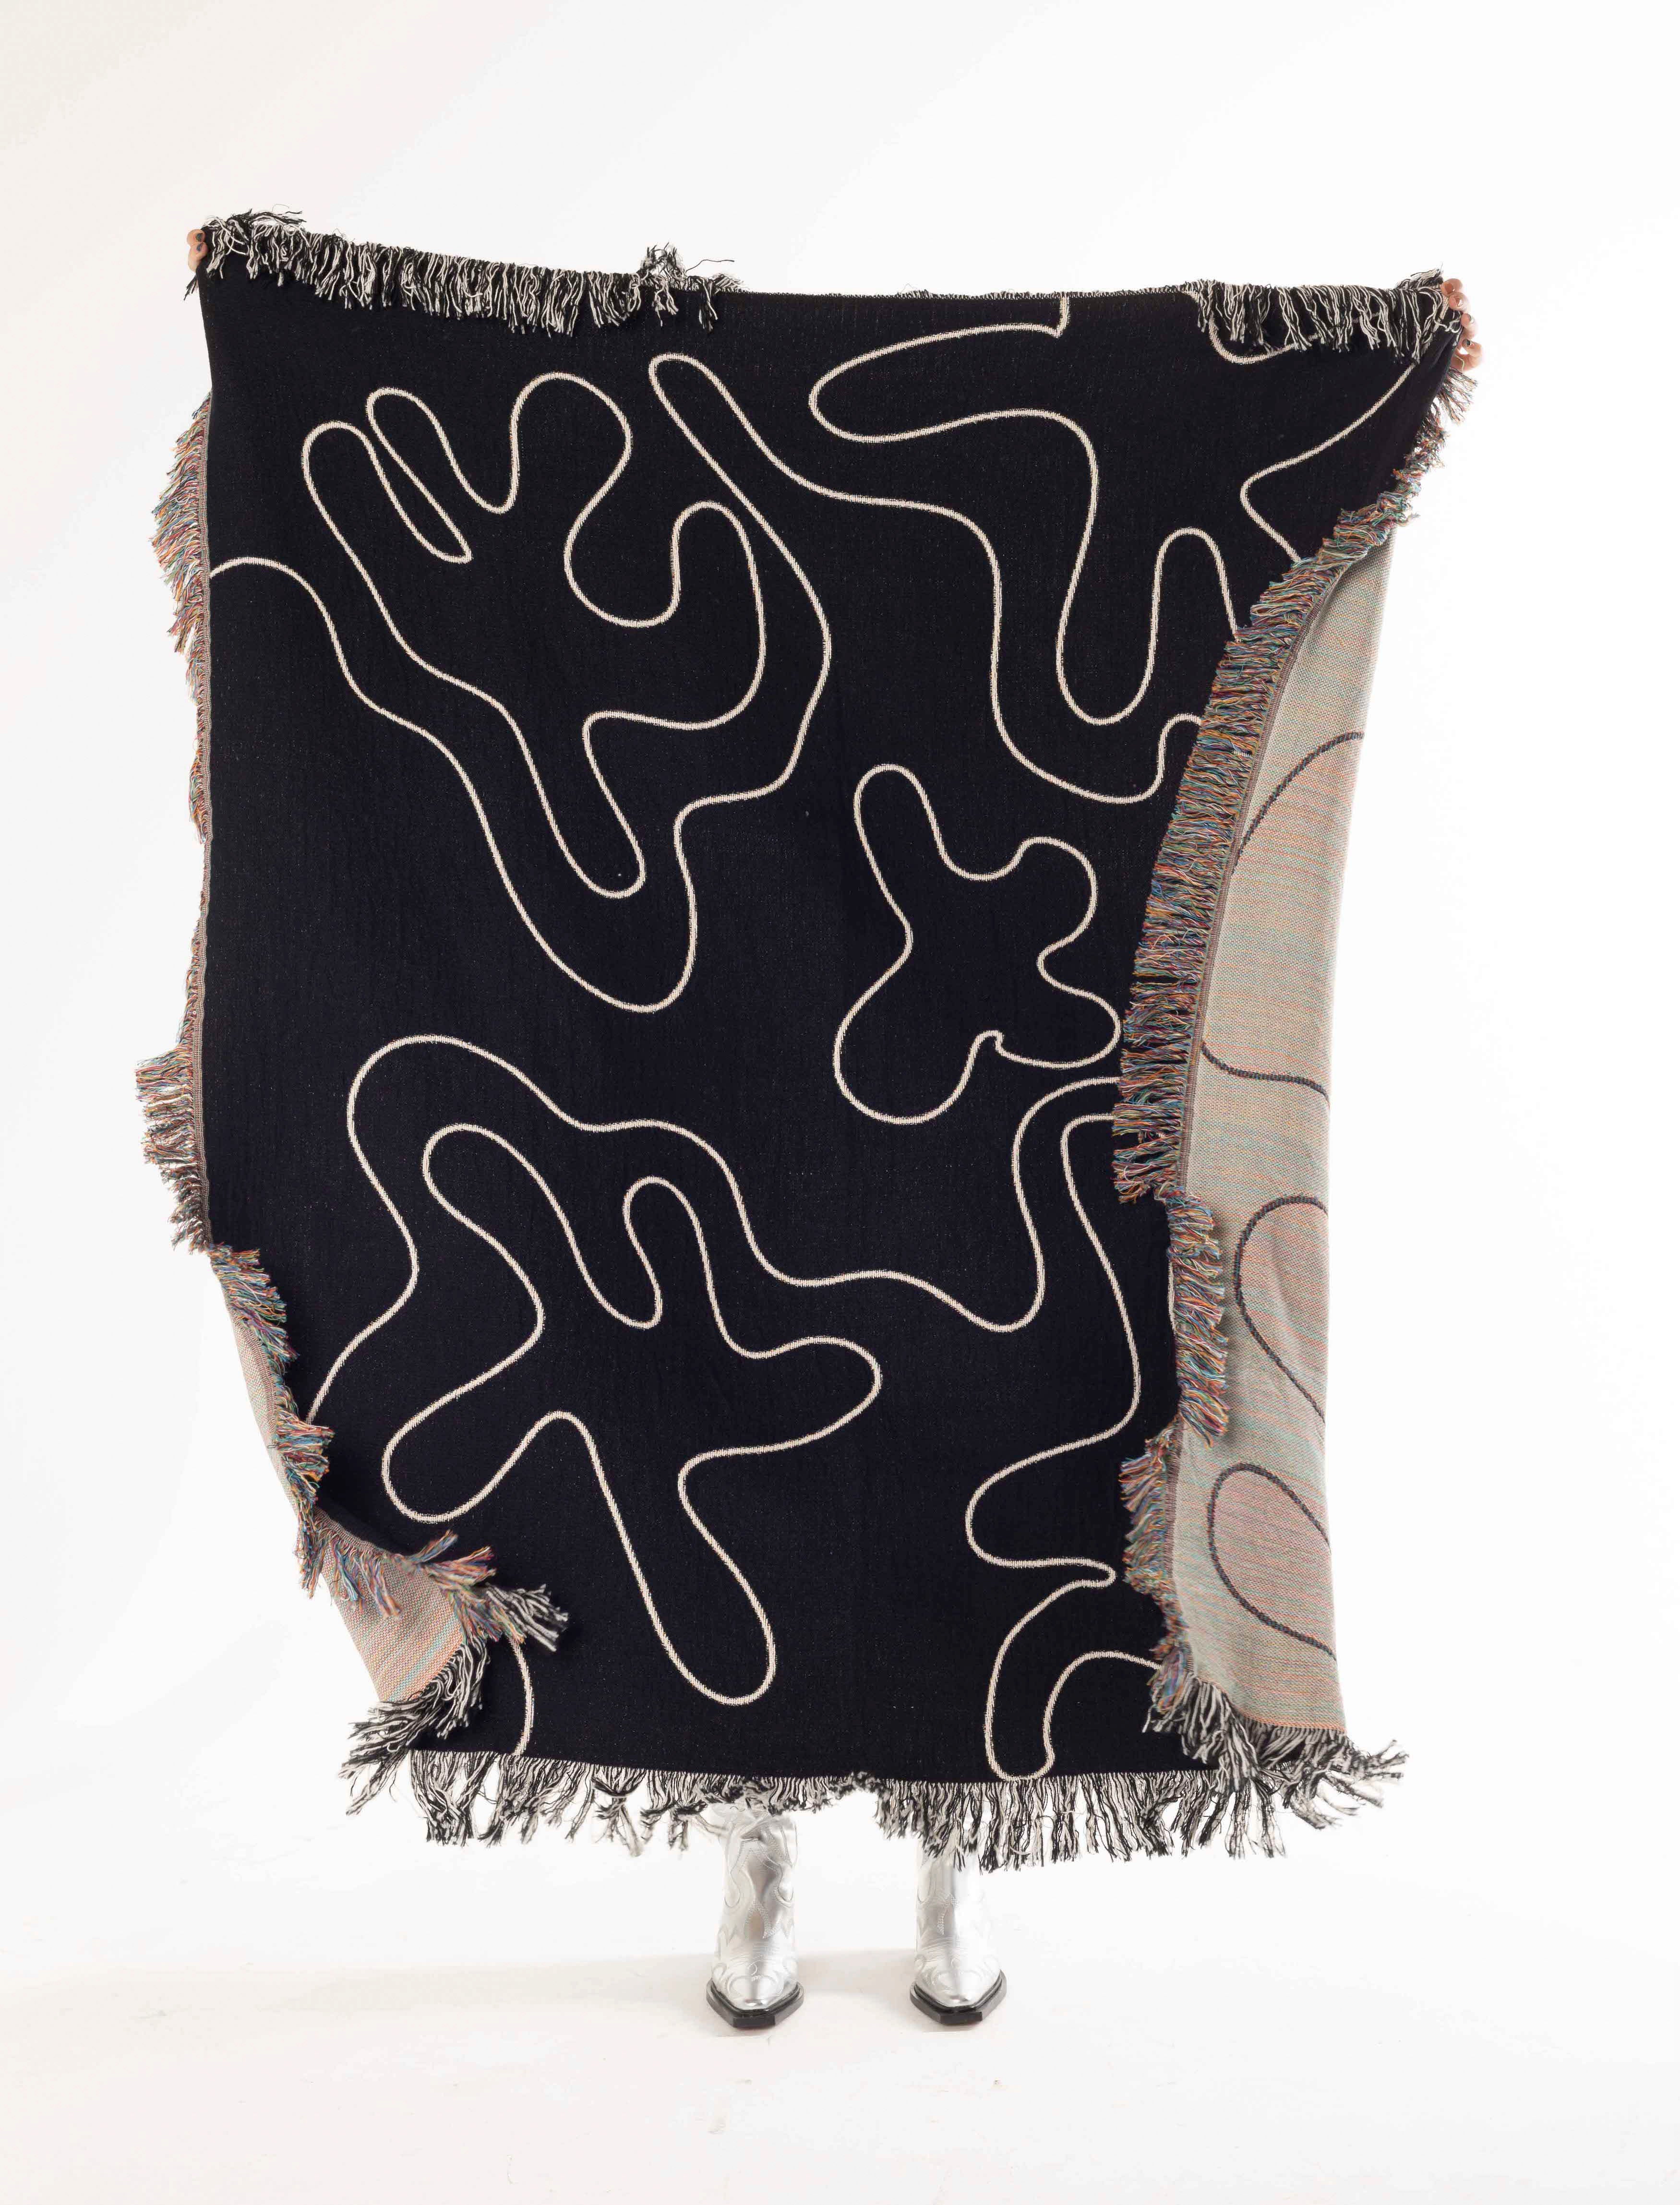 Clr〕Dancing Shapes - B&W Woven Throw Blanket / Waft.